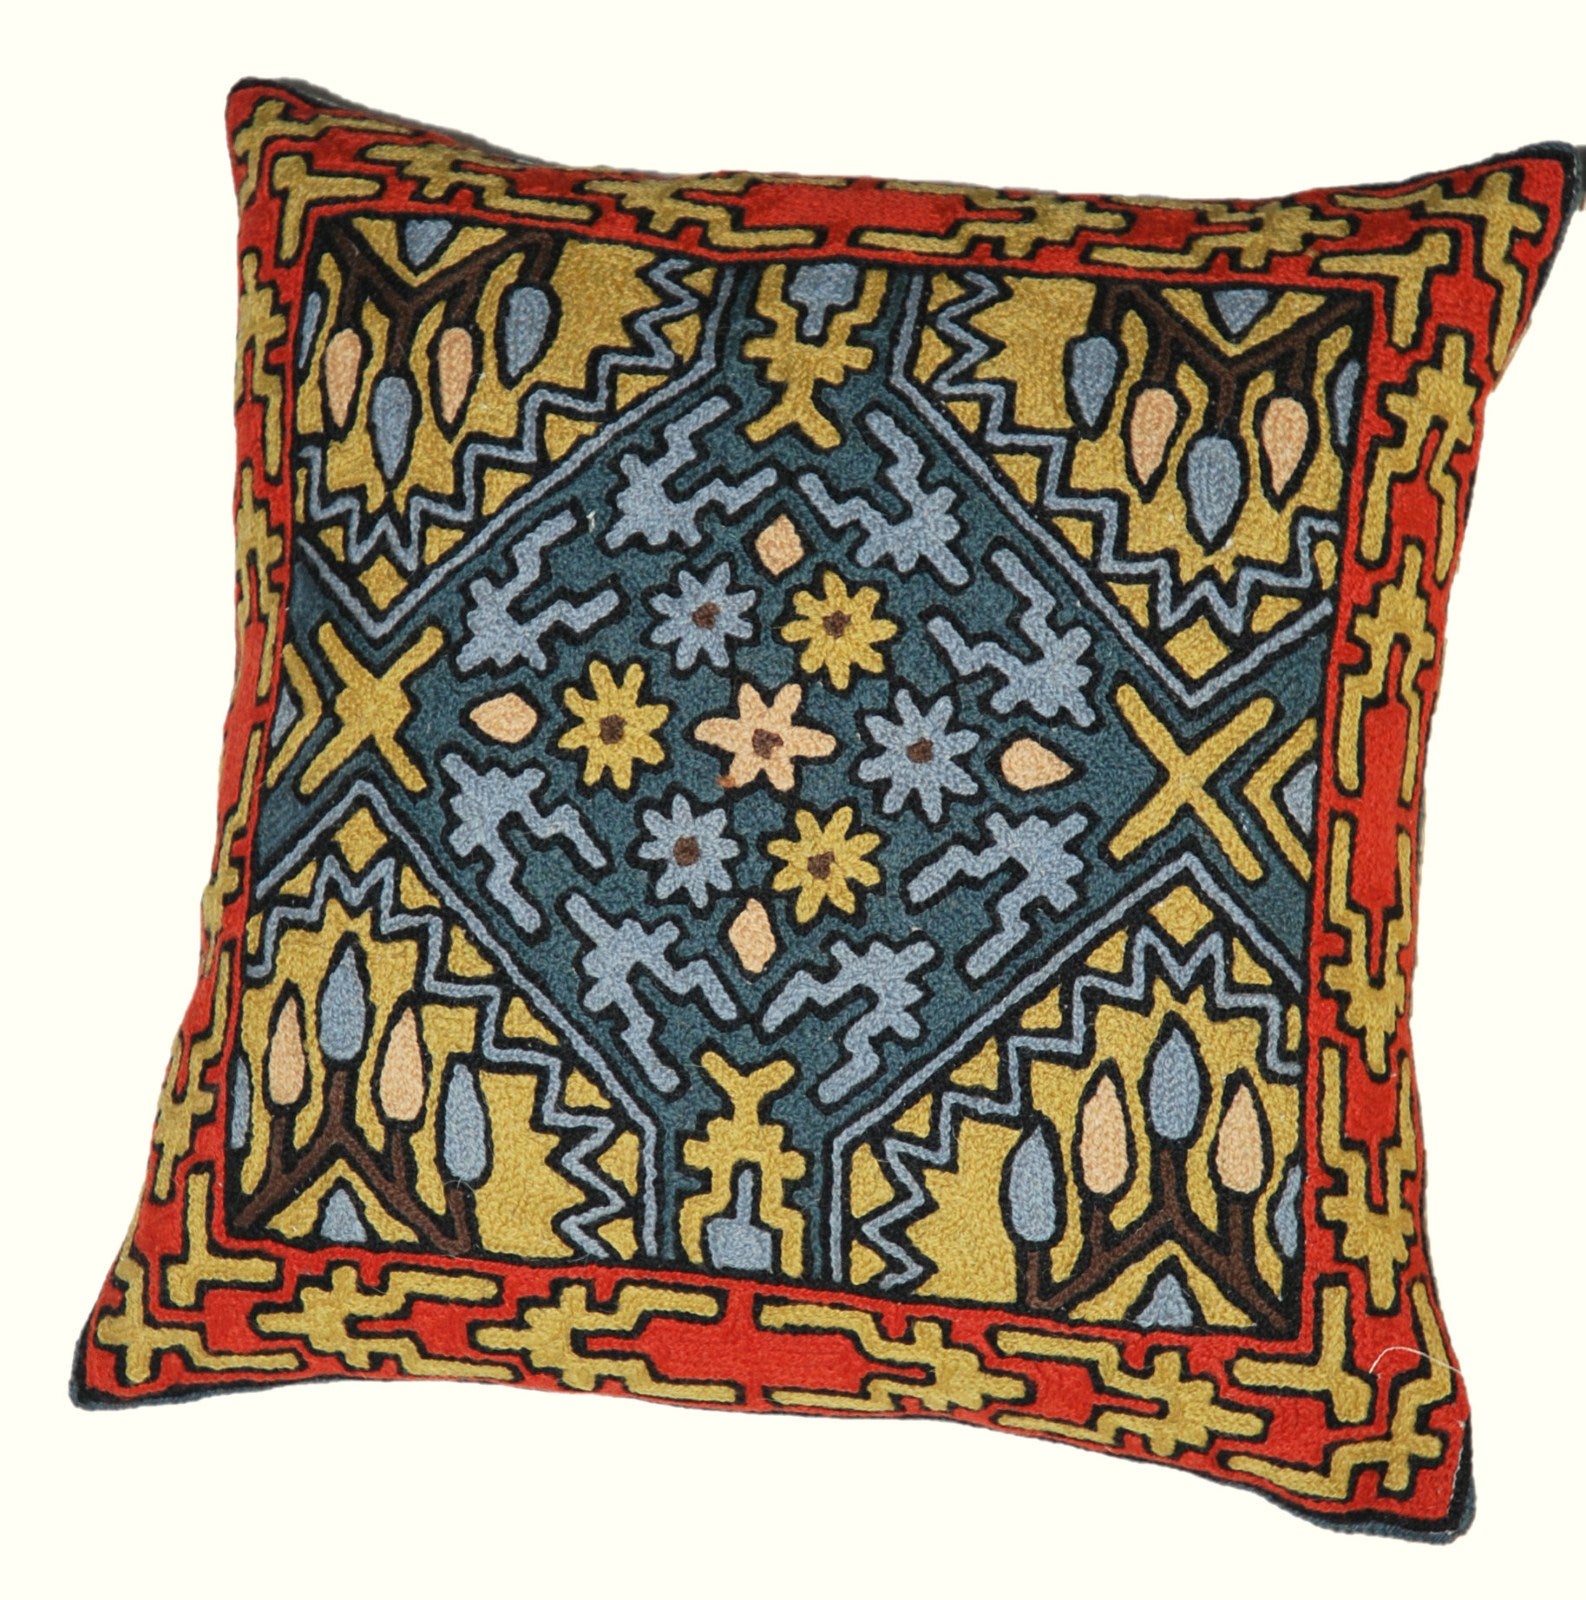 Crewel Wool Embroidered Cushion Throw Pillow Cover, Multicolor #CW1005